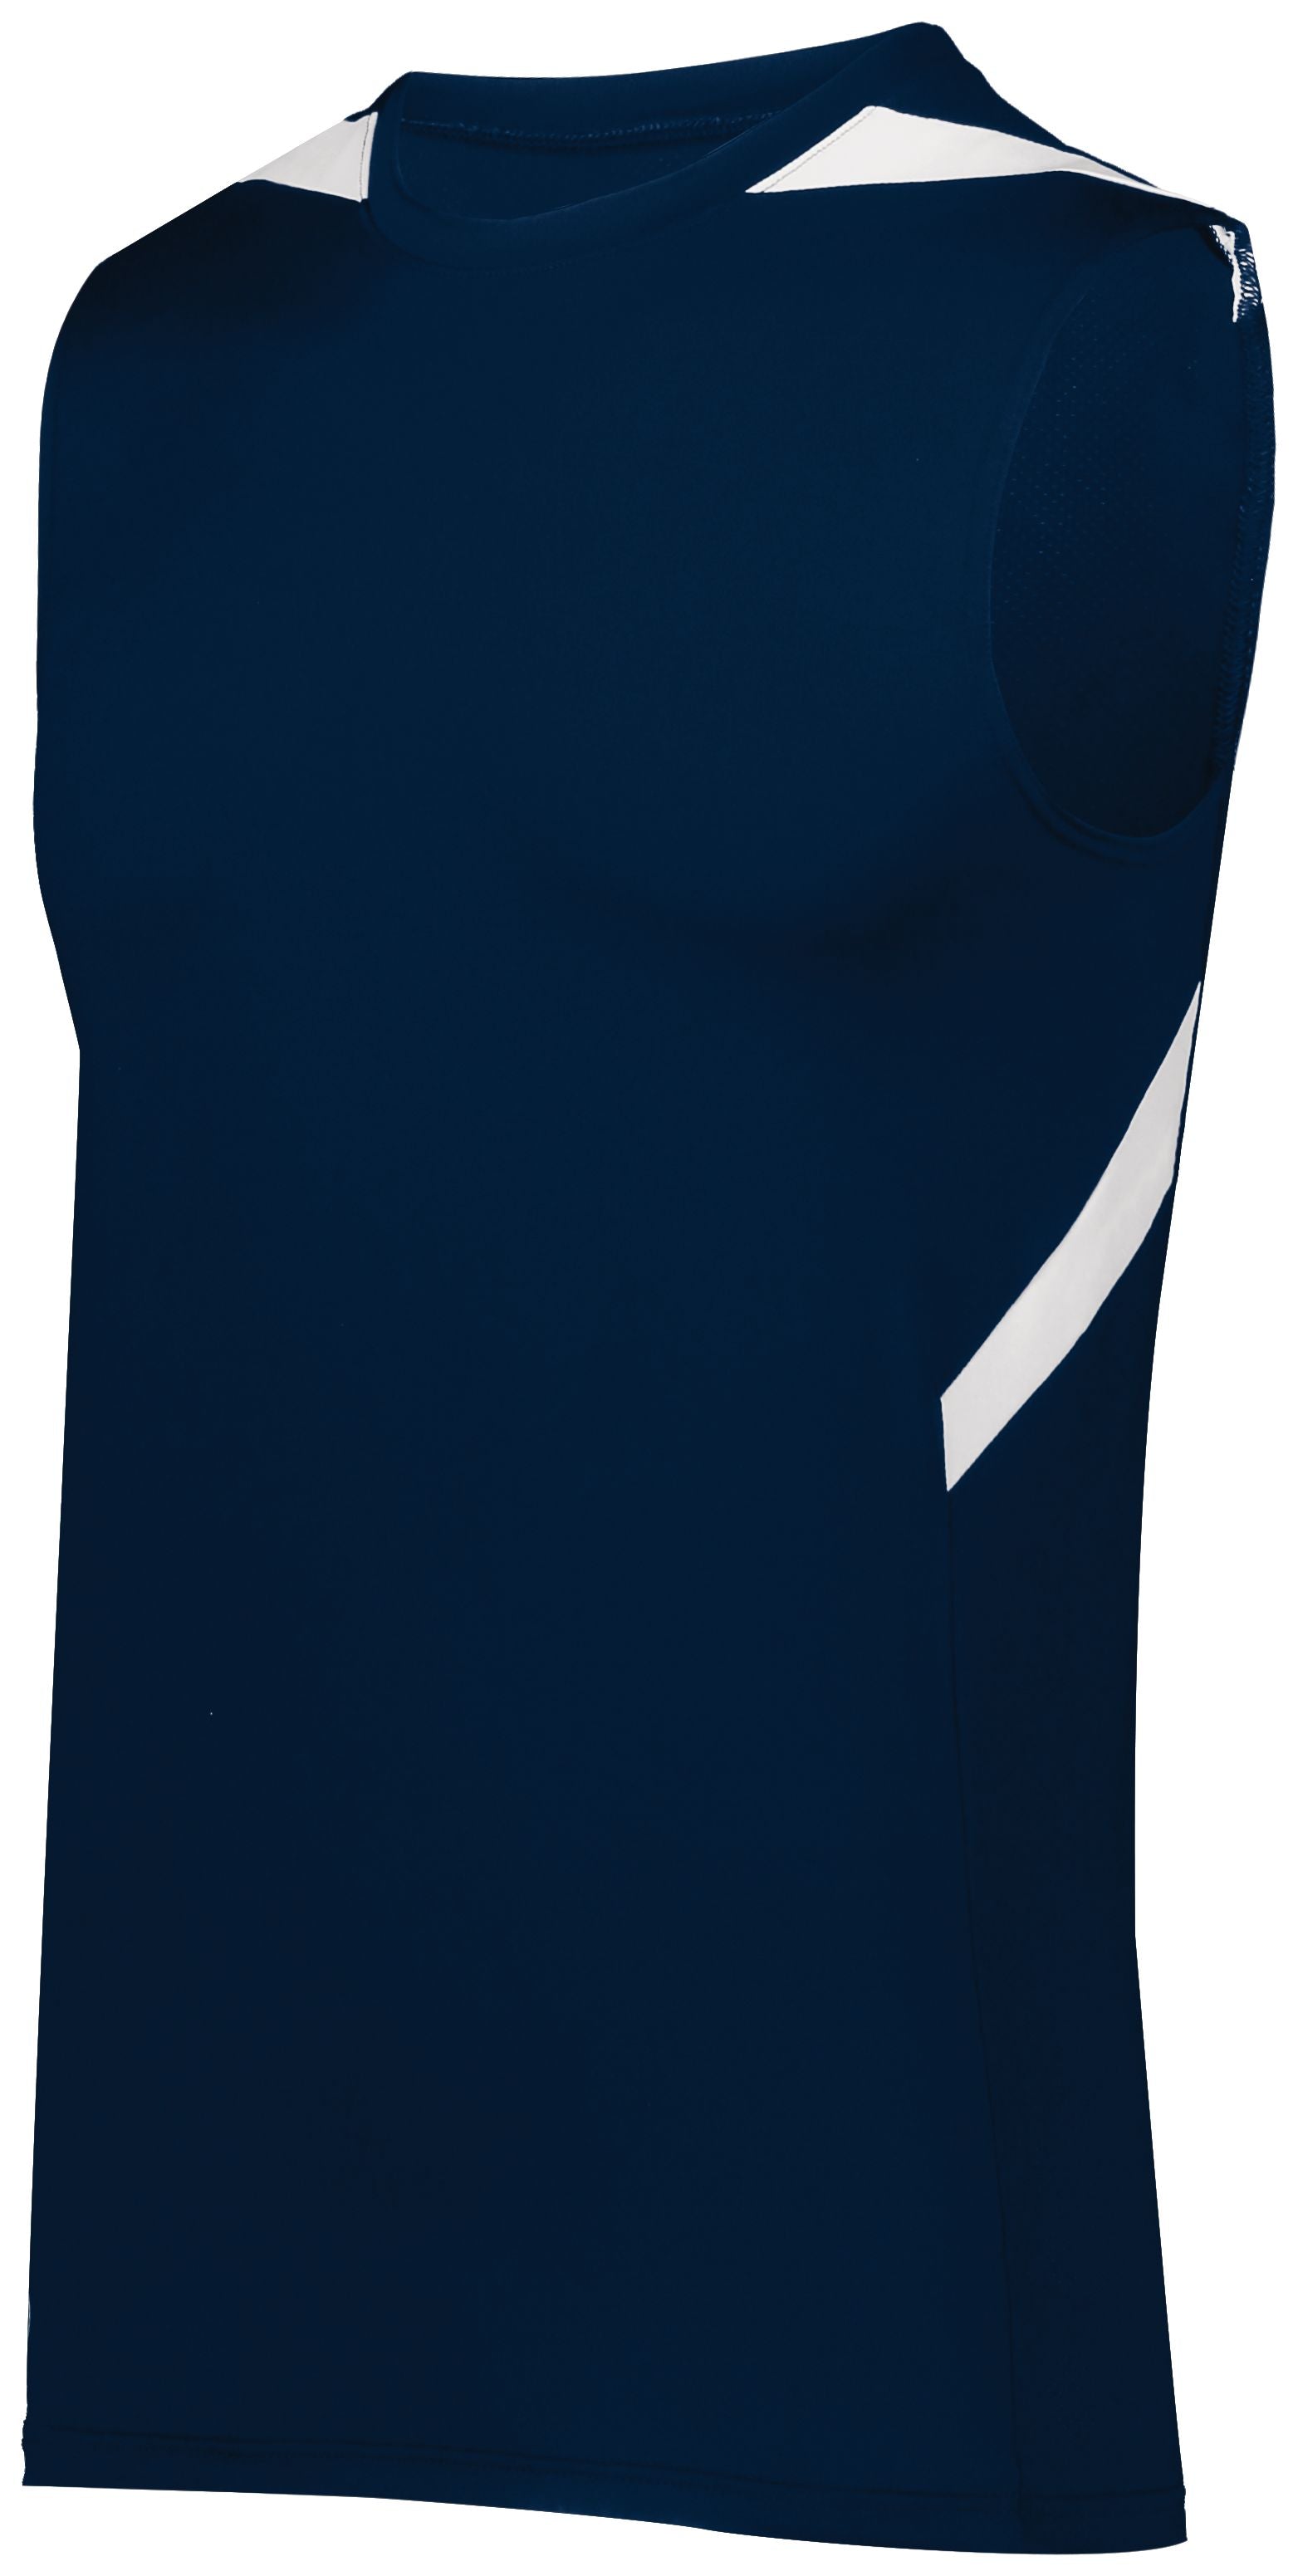 Holloway Pr Max Compression Jersey in Navy/White  -Part of the Adult, Adult-Jersey, Track-Field, Holloway, Shirts product lines at KanaleyCreations.com